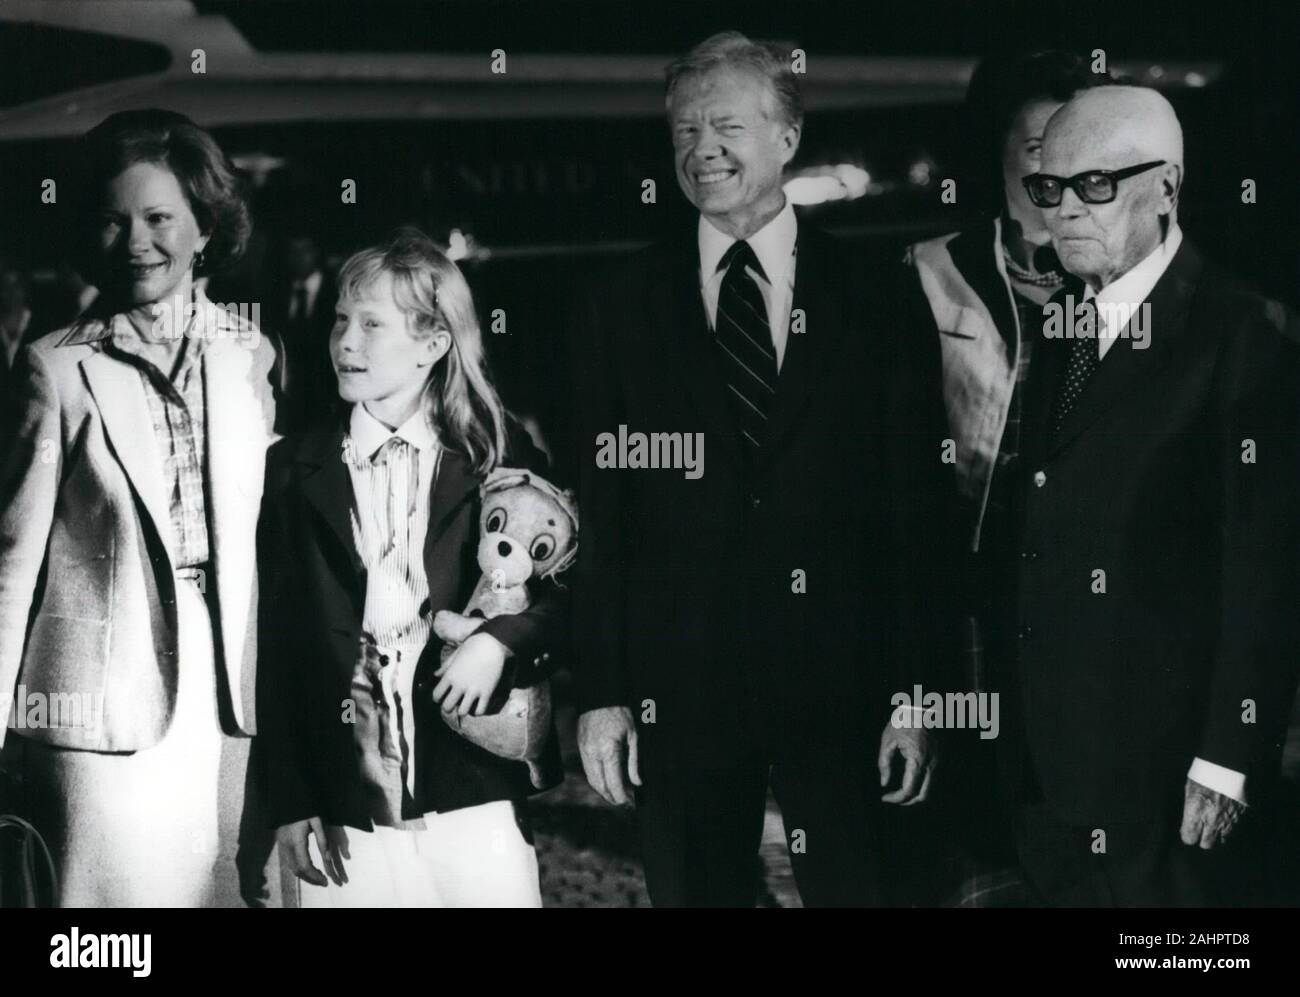 Rome, Italy. 19th June, 1980. The Carter family is met by President SANDRO PERTINI, right, on their night arrival. President JIMMY CARTER, second from right, and his wife First Lady ROSALYN CARTER, left, arrived by helicopter with their daughter AMY CARTER, second from left. The helicopter landed in the park of the Quirinali palace where the President and his family will stay while in Rome. Amy carried her ''Snoopy'' stuffed animal on the flight from Washington, DC Credit: Keystone Pictures USA/ZUMAPRESS.com/Alamy Live News Stock Photo